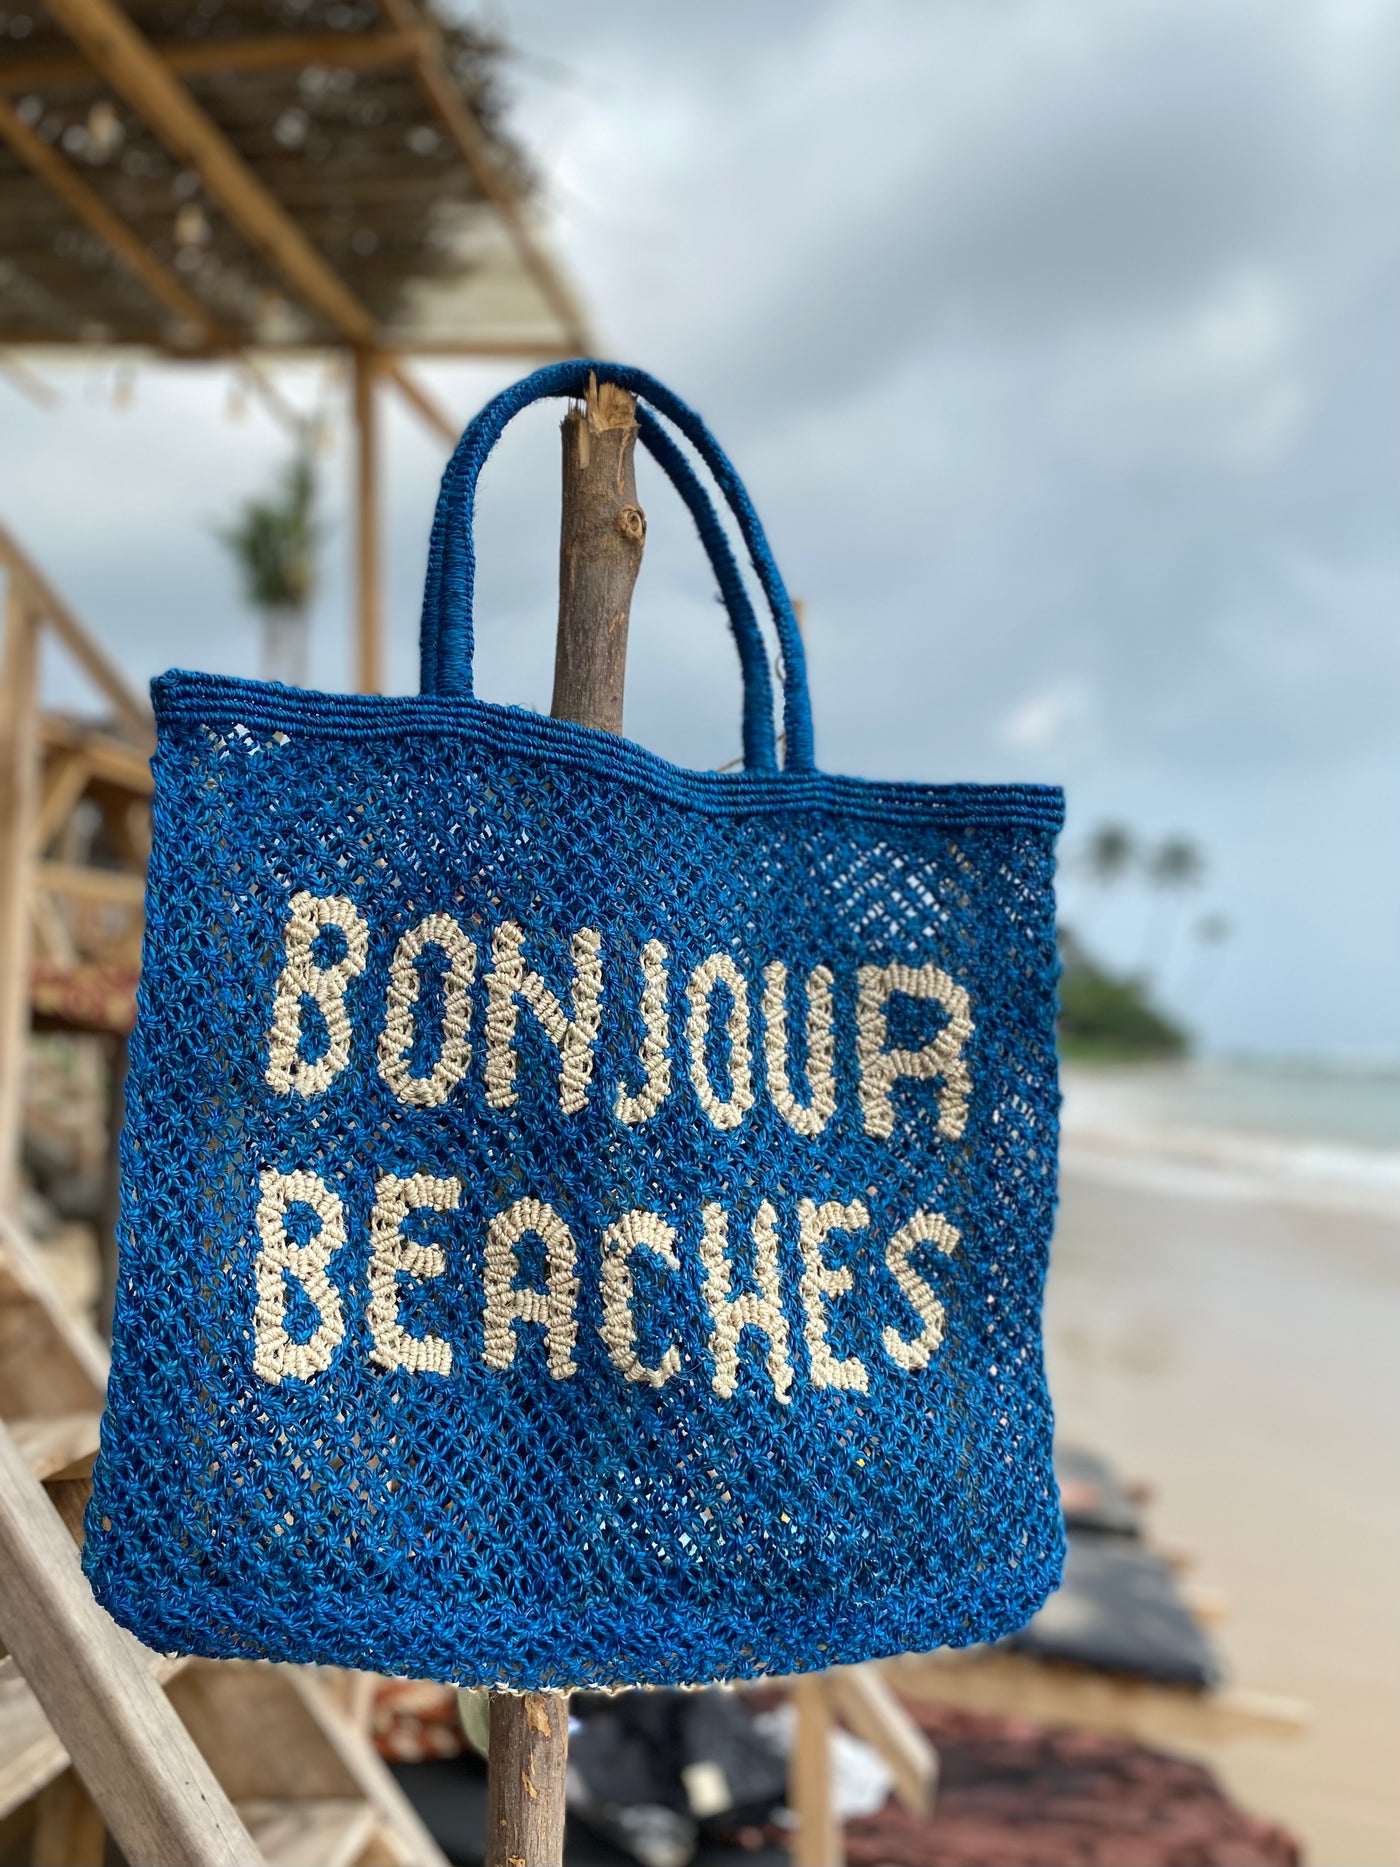 Bonjour Beaches - Cobalt and natural (arriving end of May)